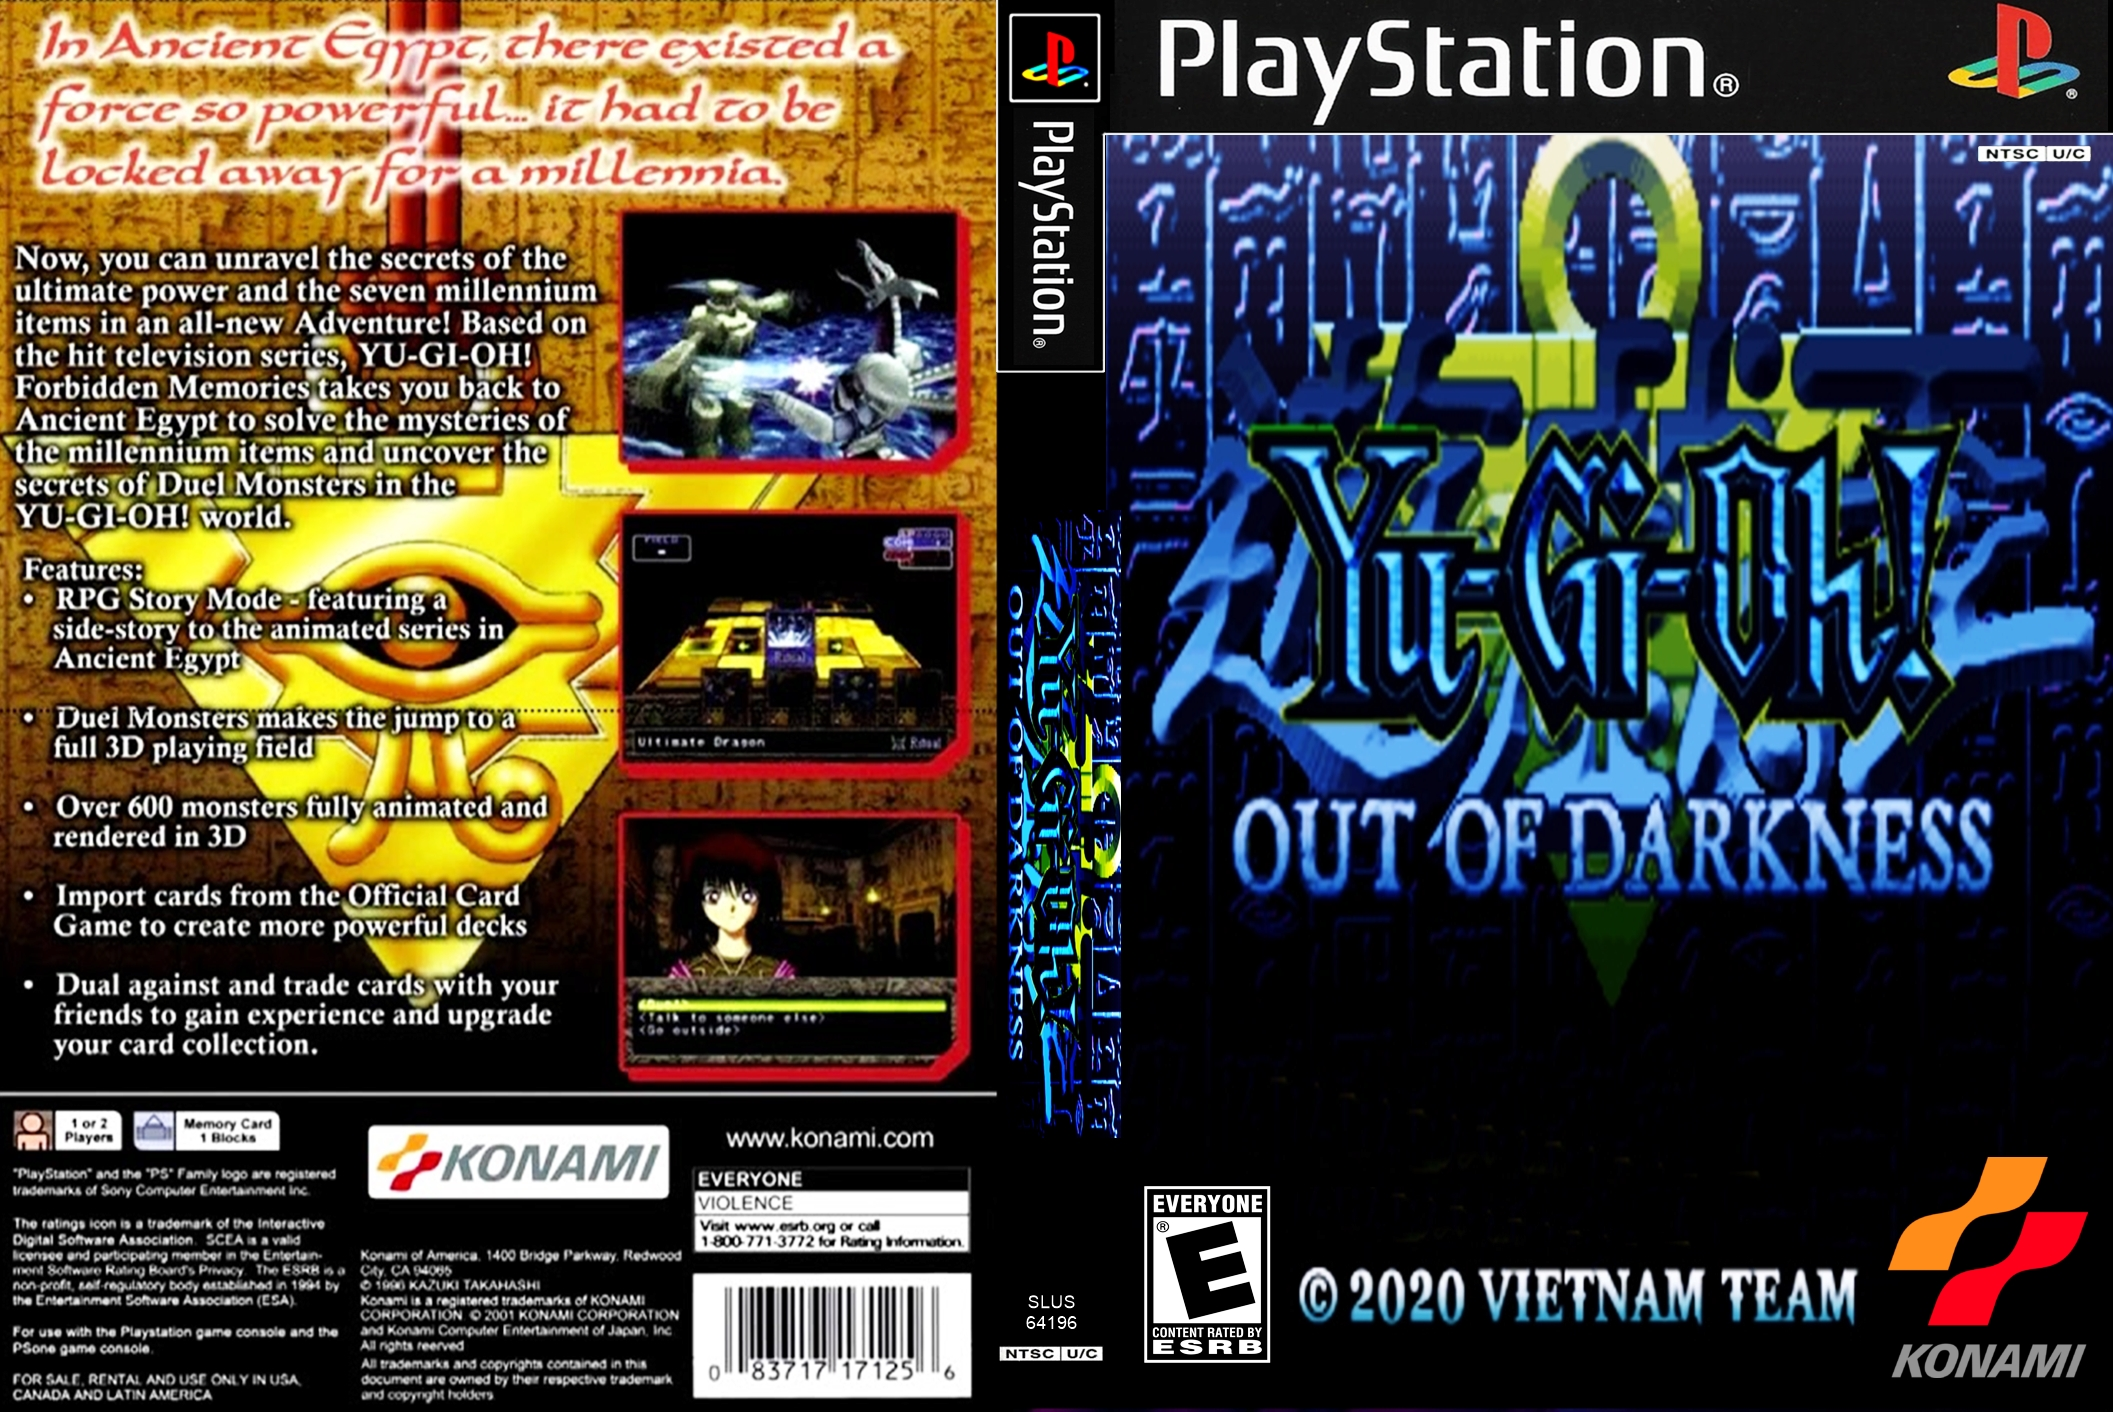 Baixar Yu-Gi-Oh! Out of Darkness Final! Mod USA PS1 O mod Out of